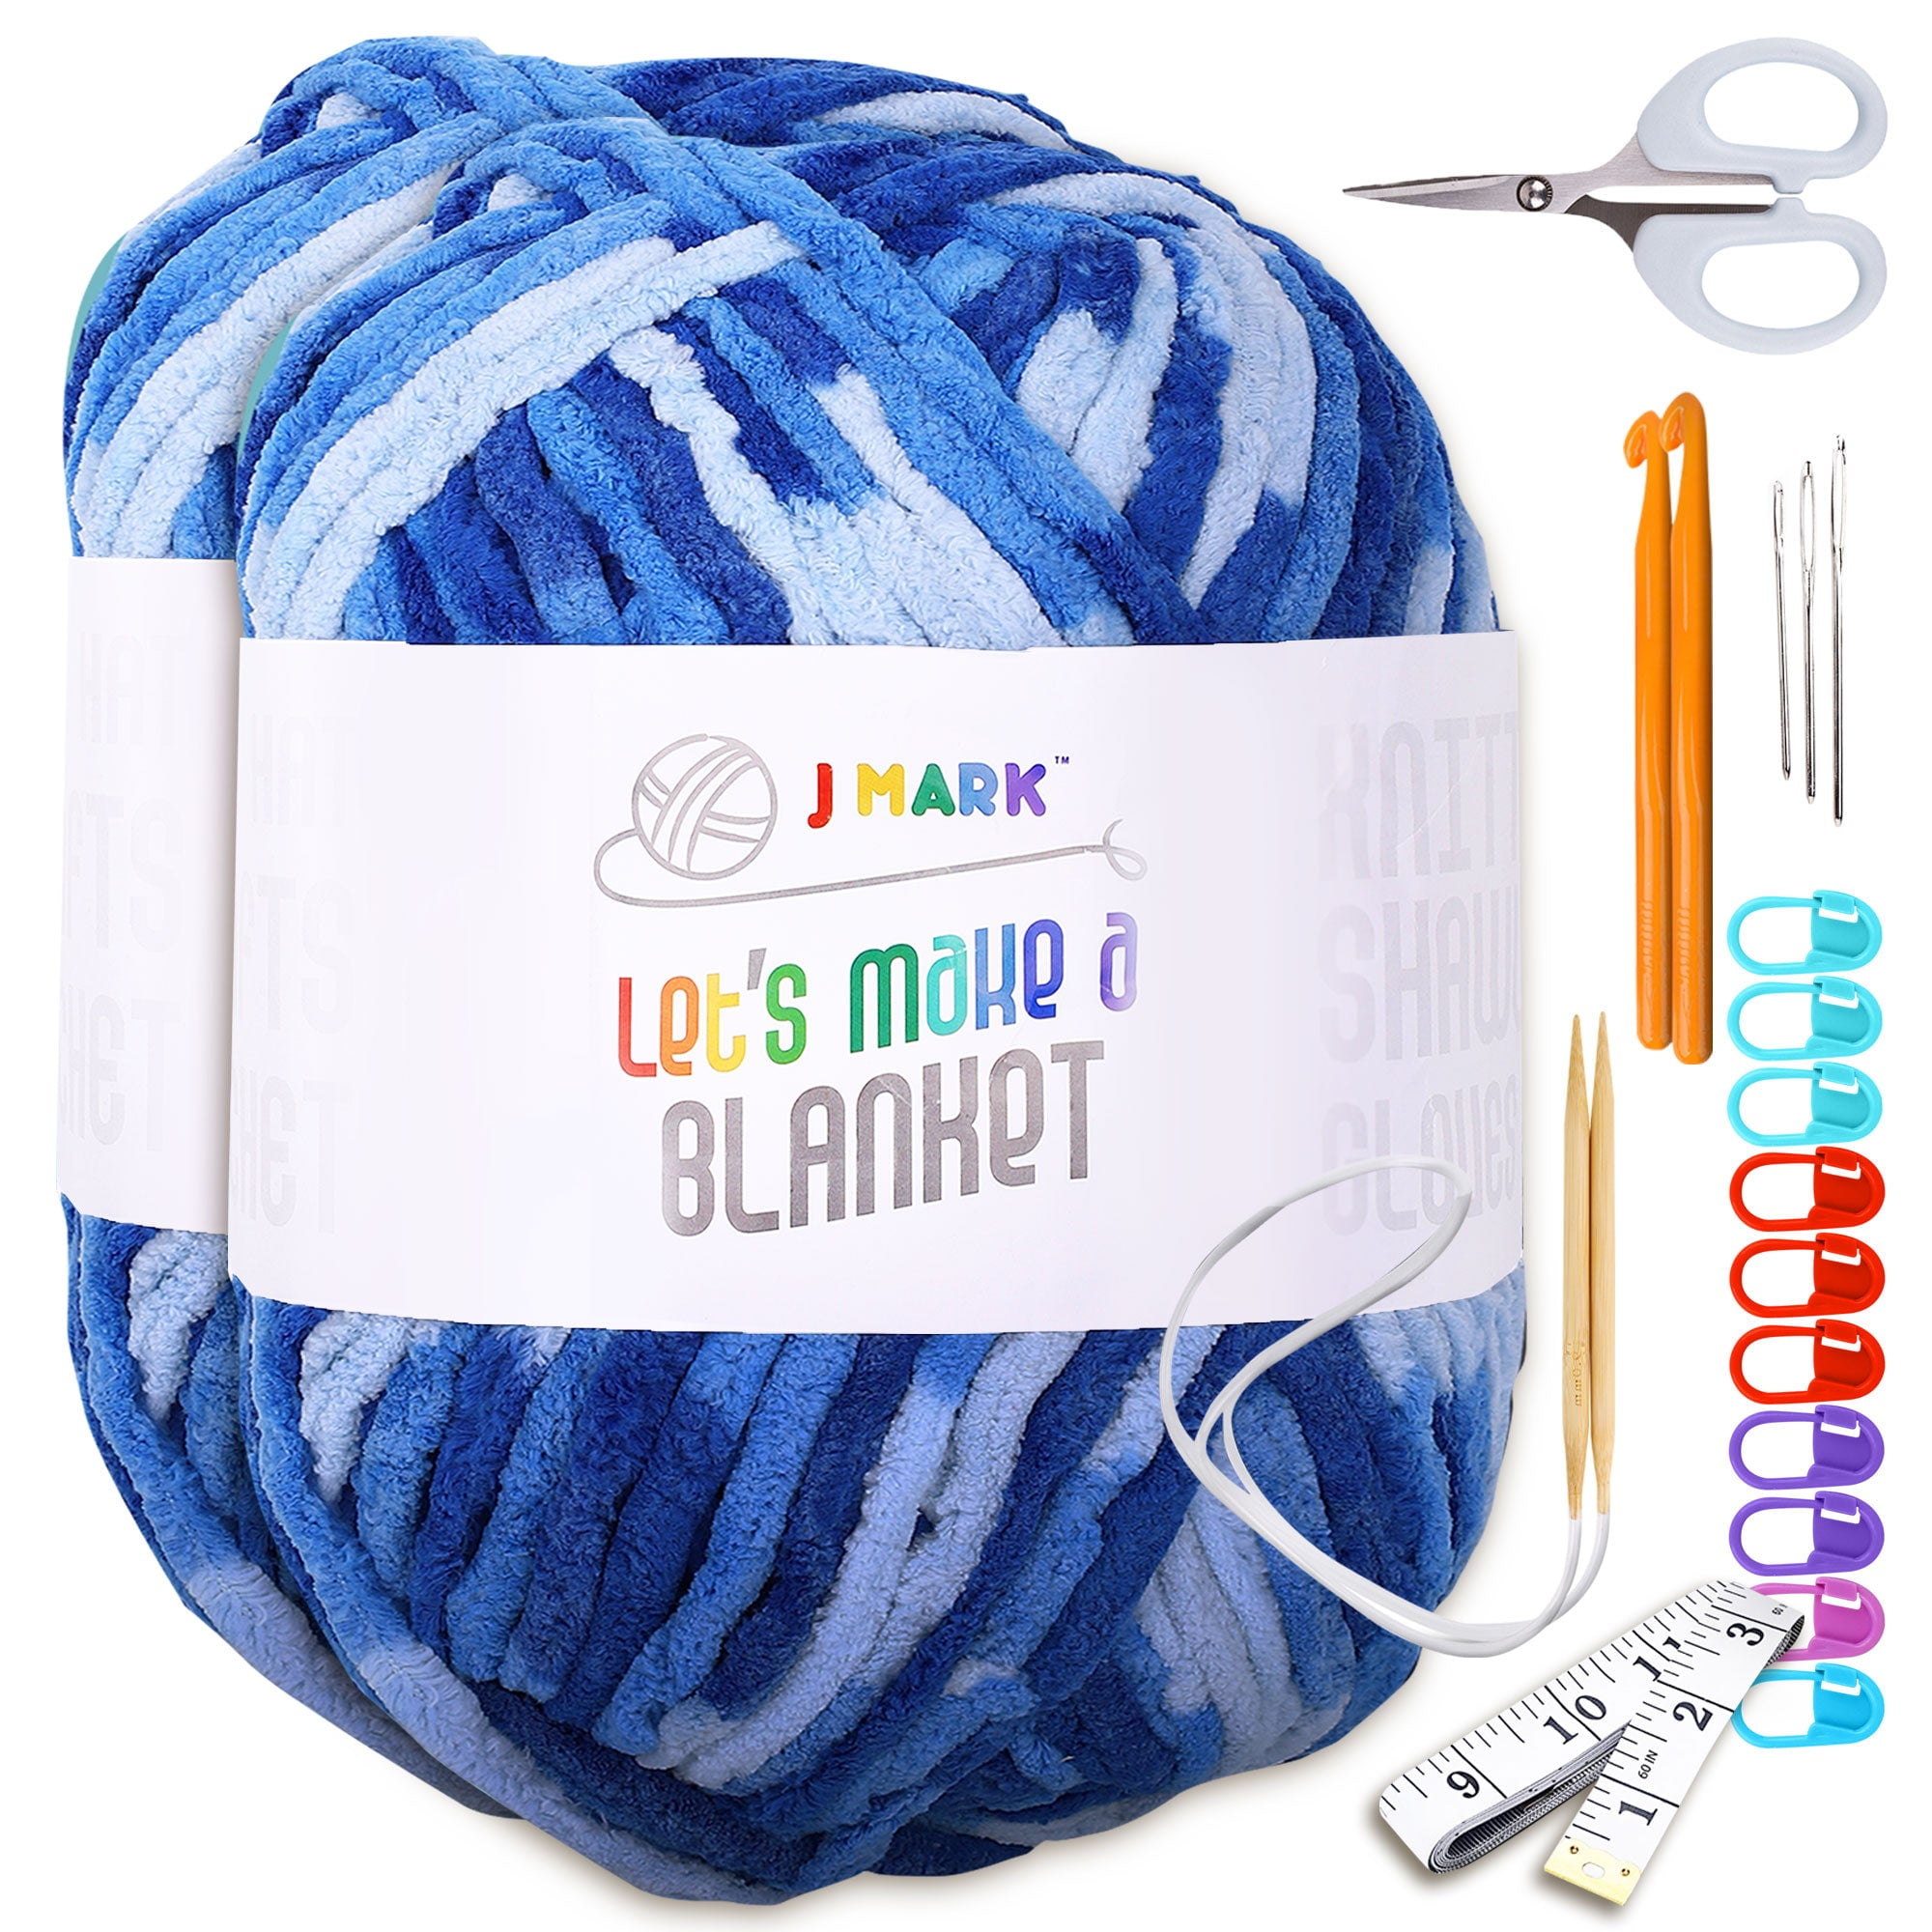 Surprise Chunky Blanket Colors! Includes 5 skeins - Makers Choice – Makers  Craft & Paint Nite Kits